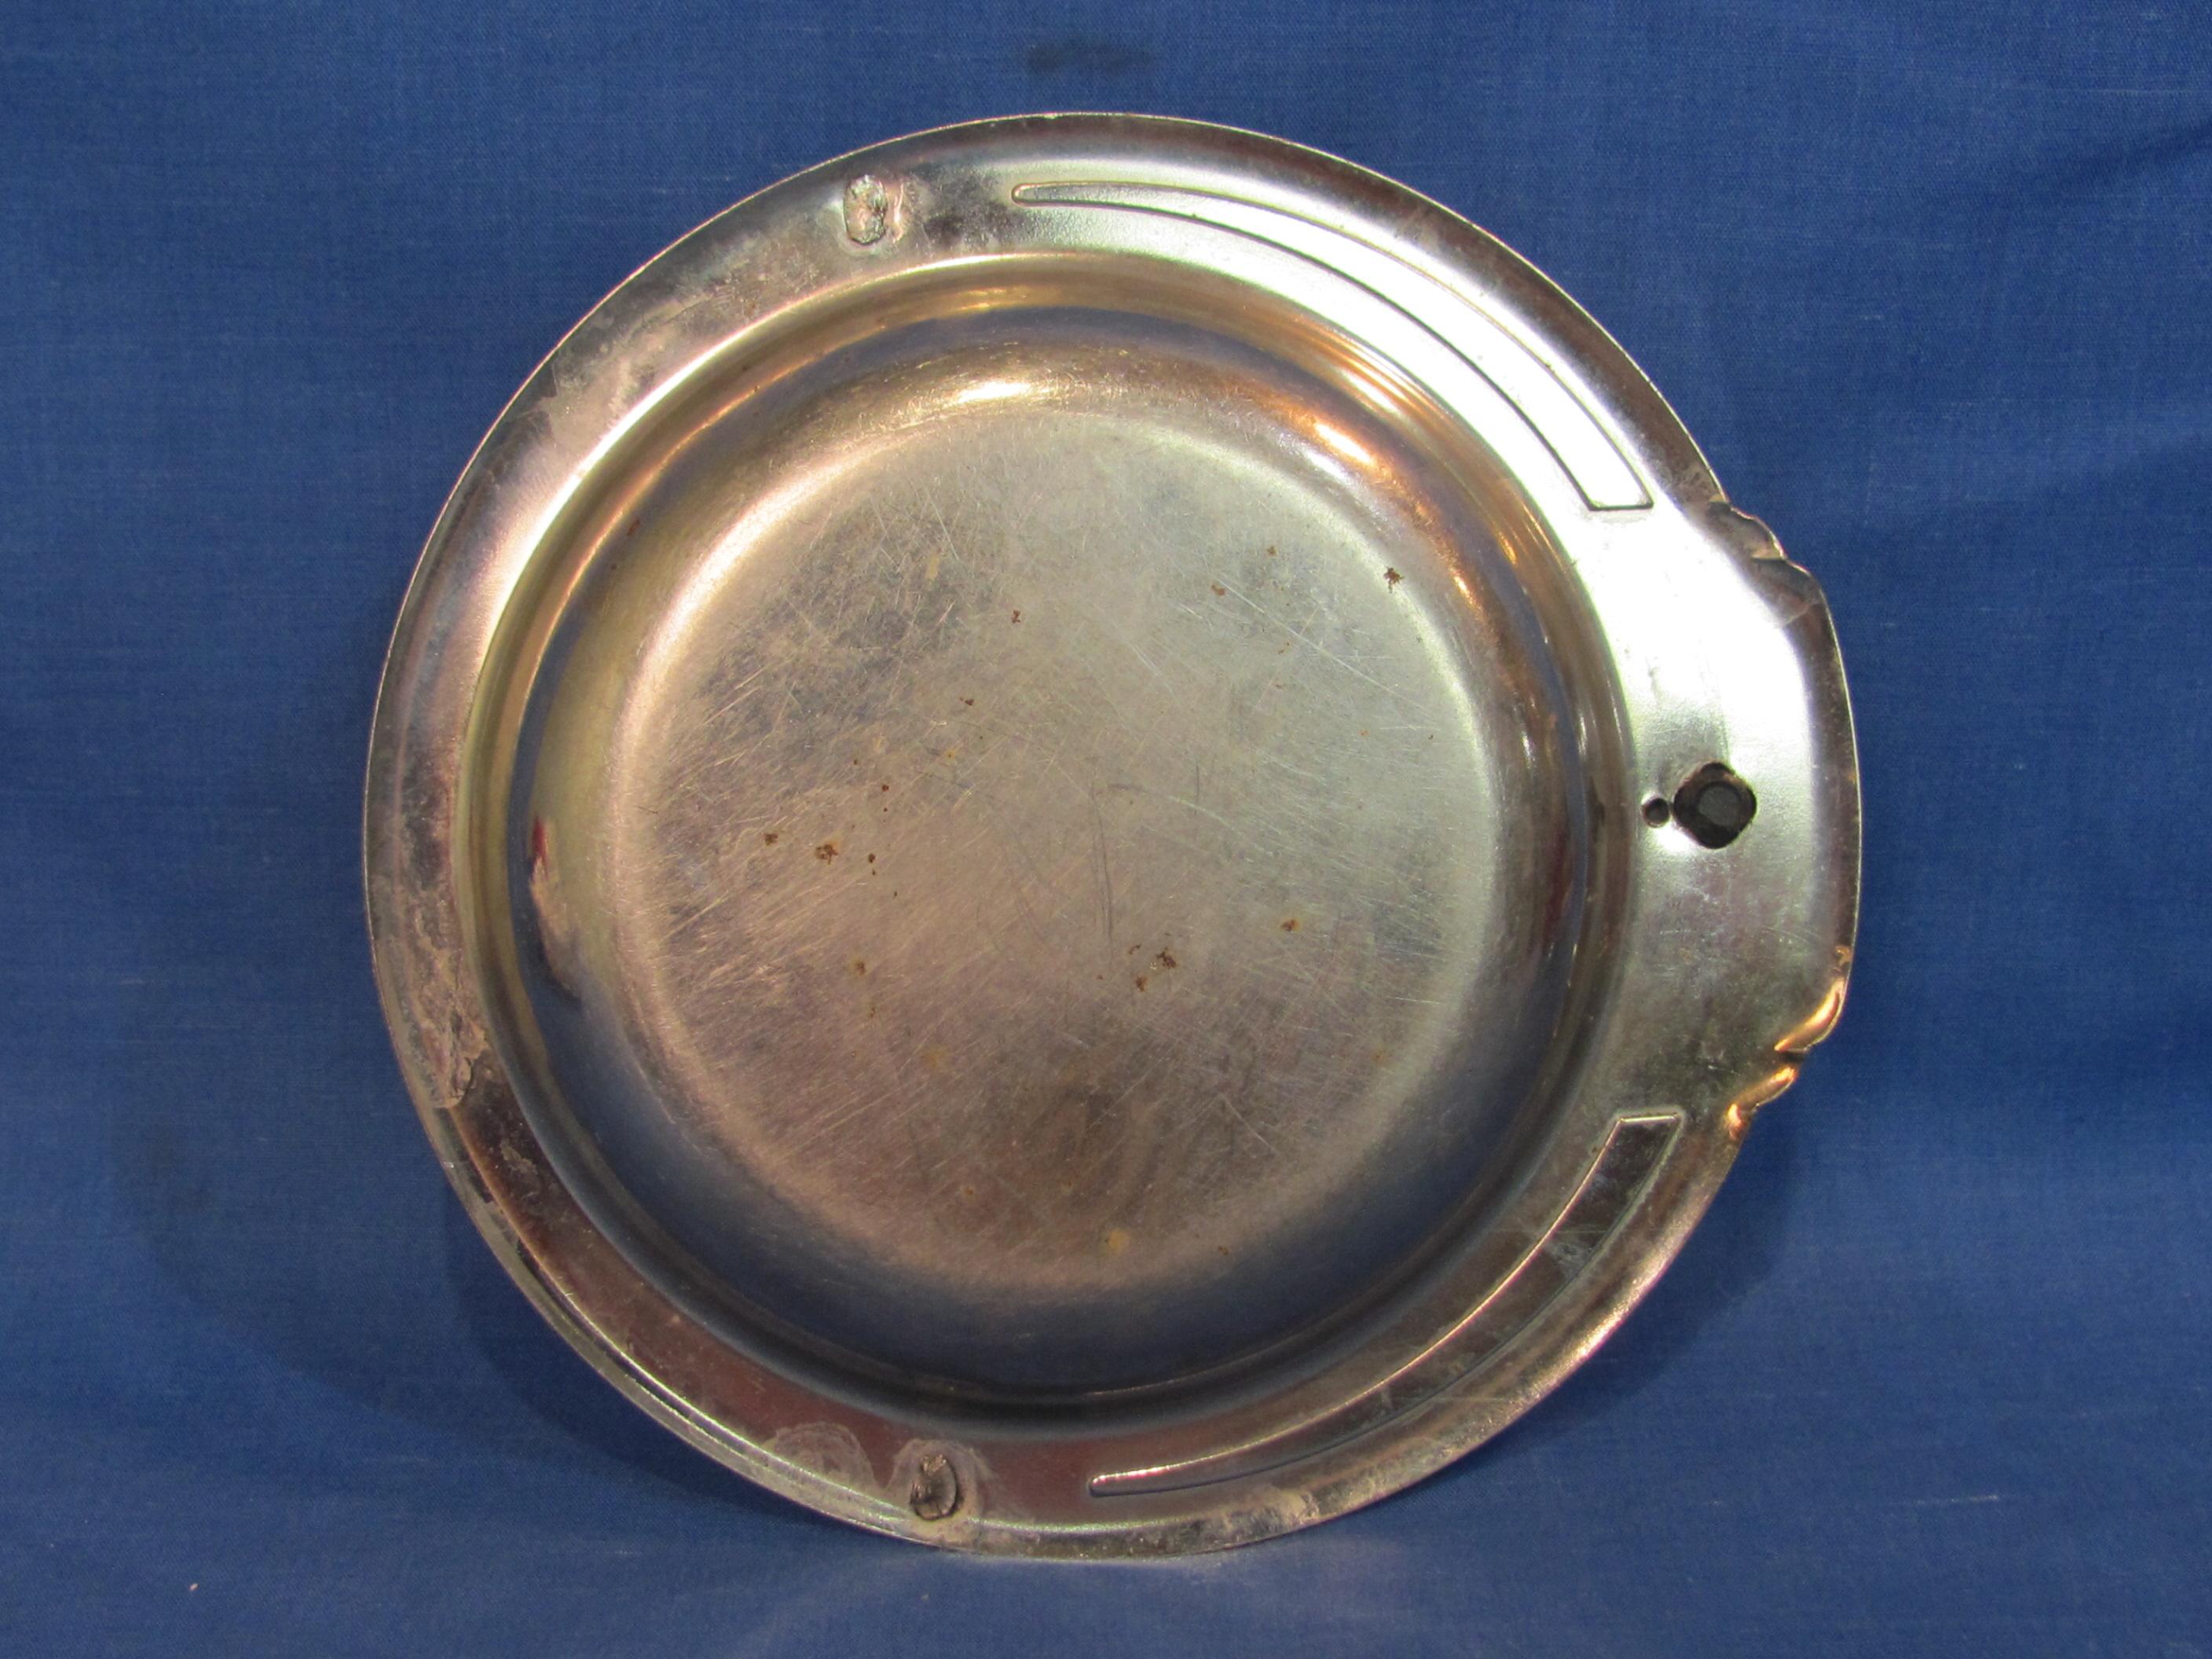 Silvertone Metal Ashtray with Greyhound Across the Top – 5 1/4” in diameter